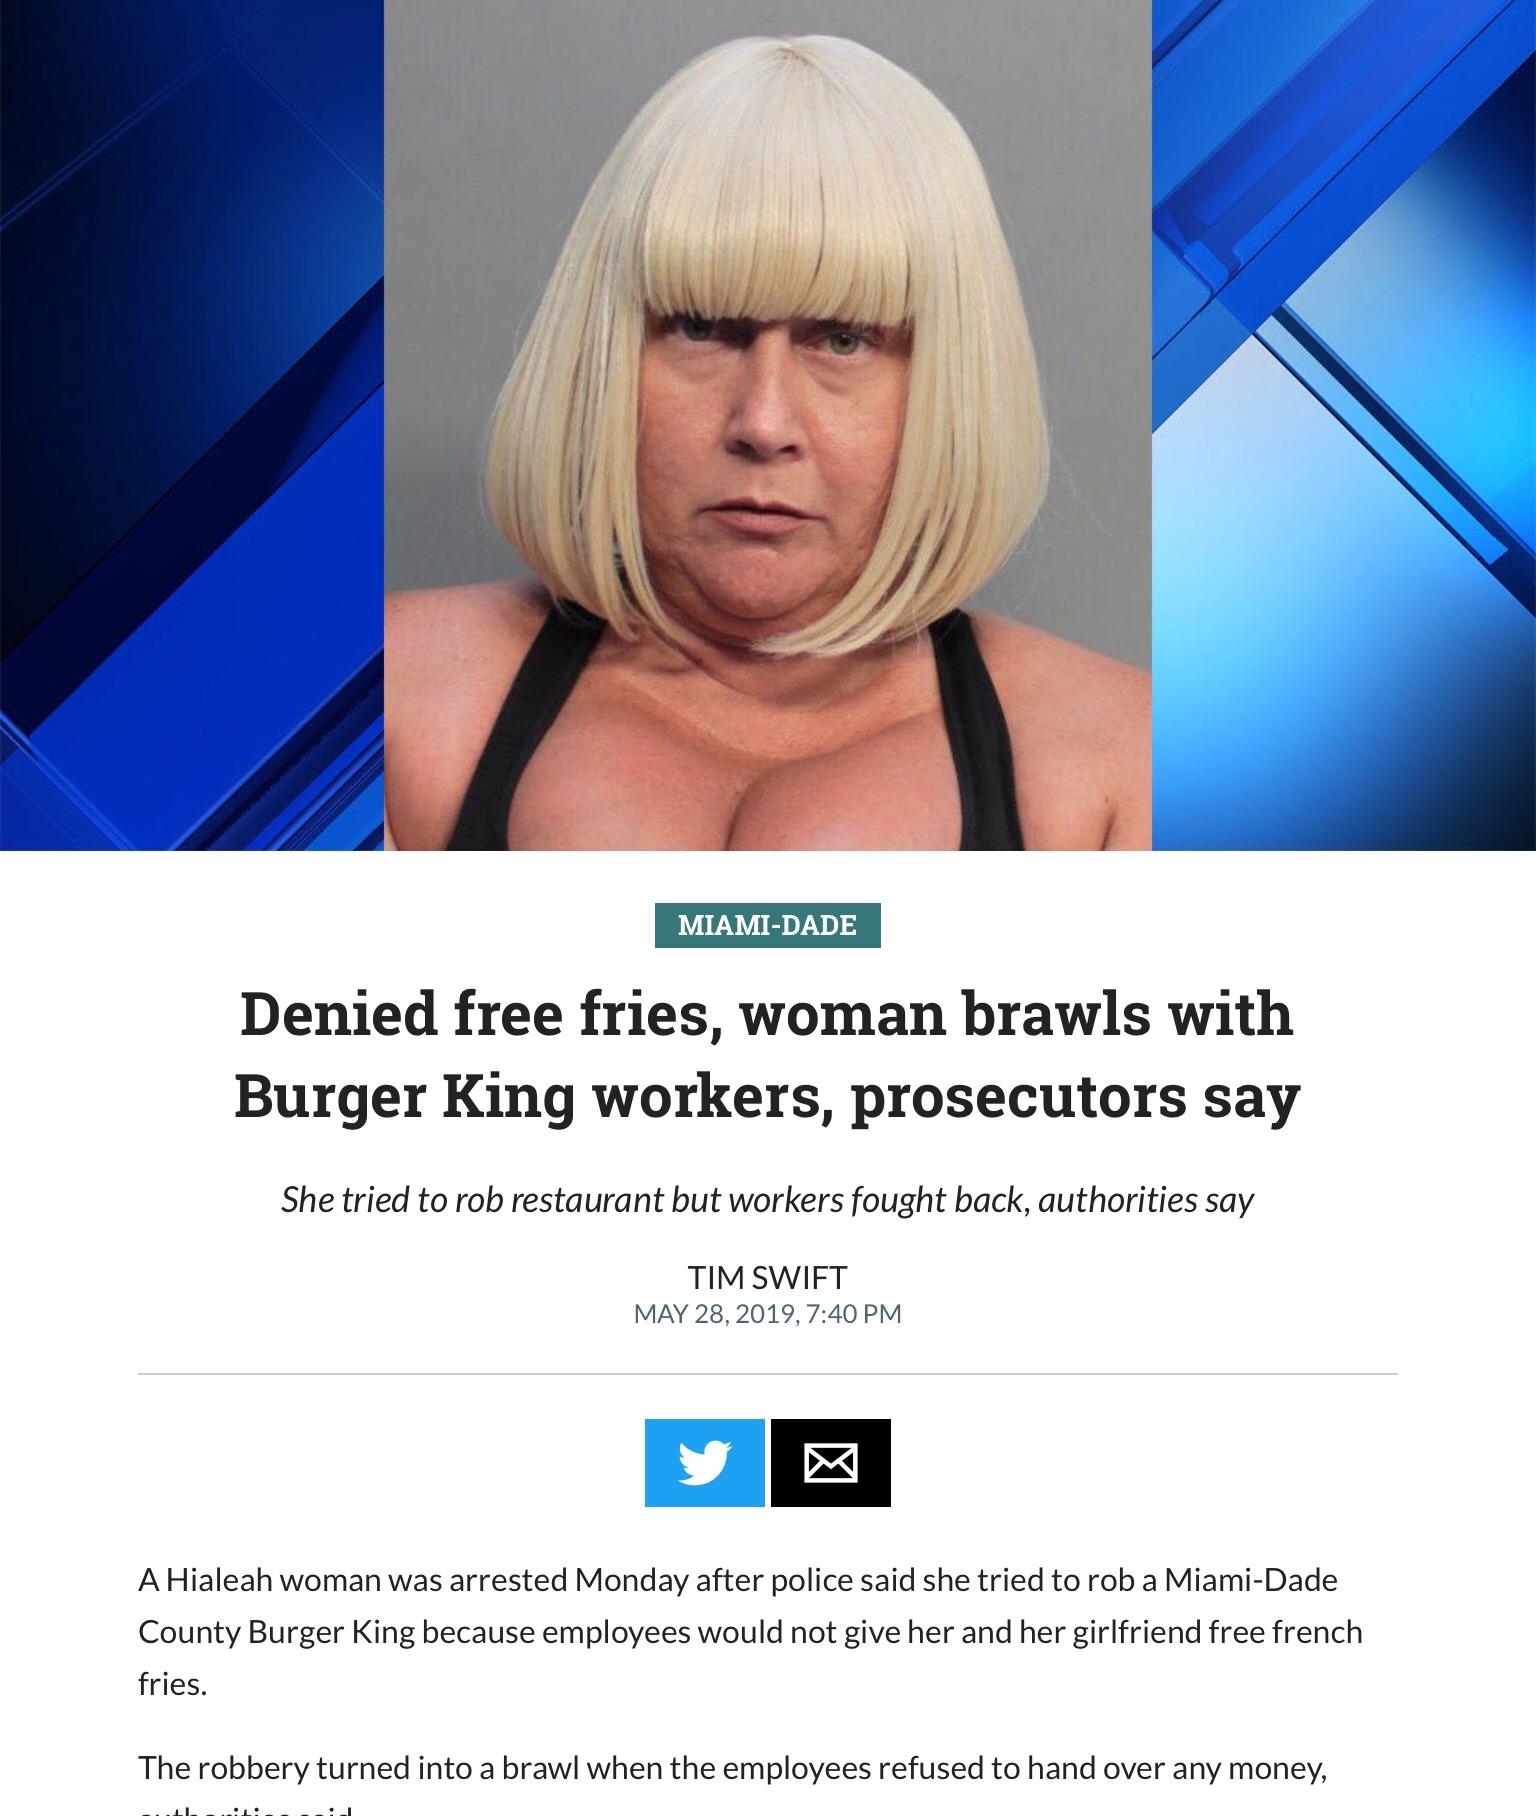 karen look - MiamiDade Denied free fries, woman brawls with Burger King workers, prosecutors say She tried to rob restaurant but workers fought back, authorities say Tim Swift , A Hialeah woman was arrested Monday after police said she tried to rob a Miam